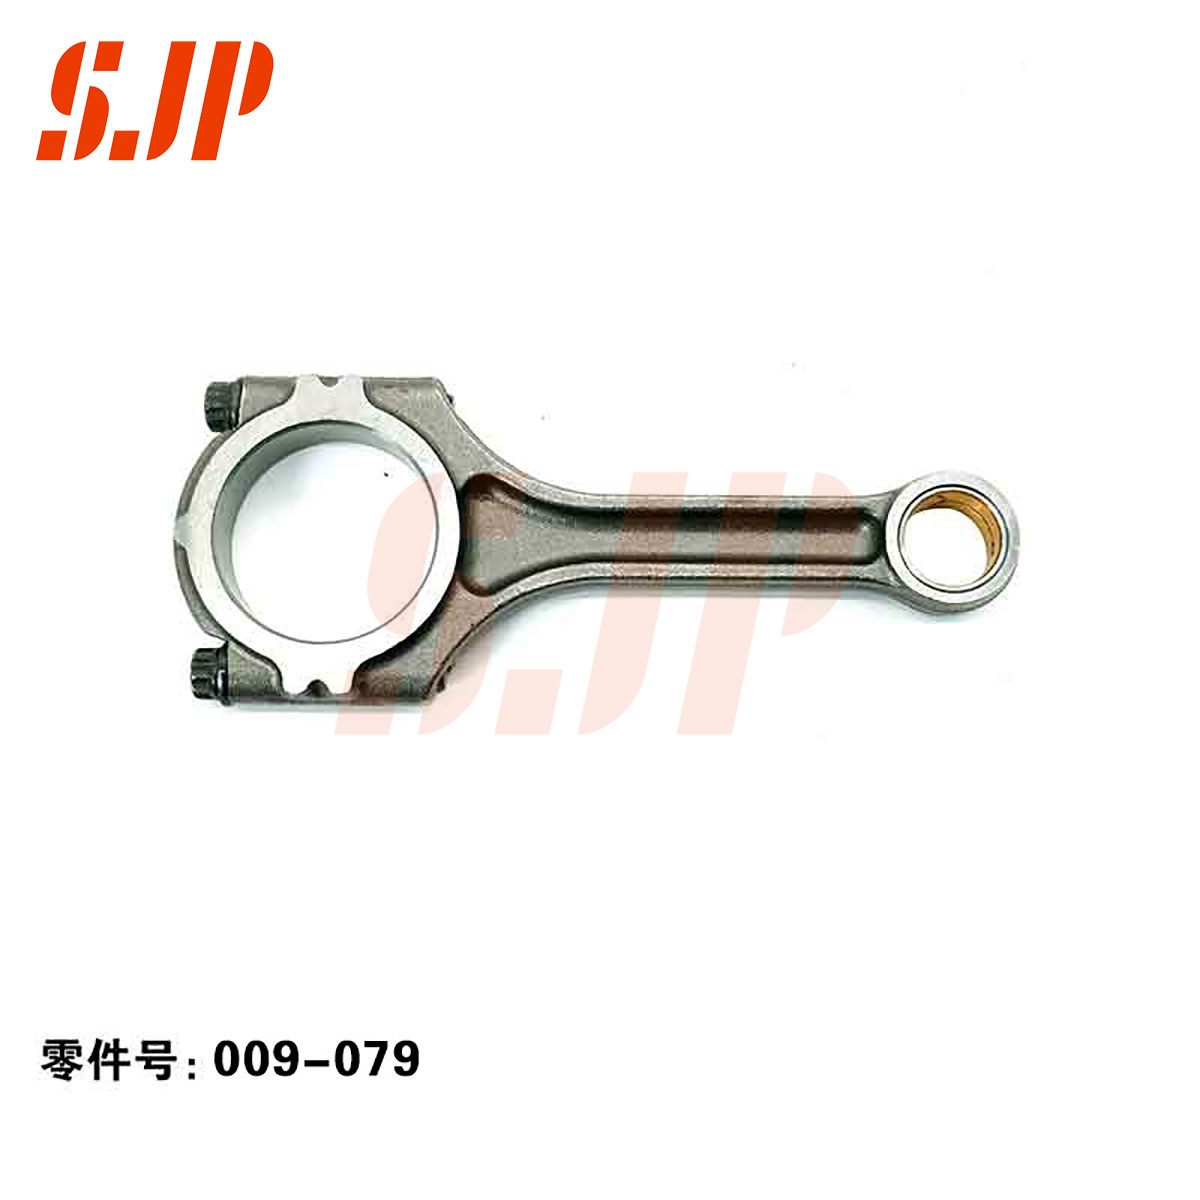 SJ-009-079 Connecting Rod For DG15T